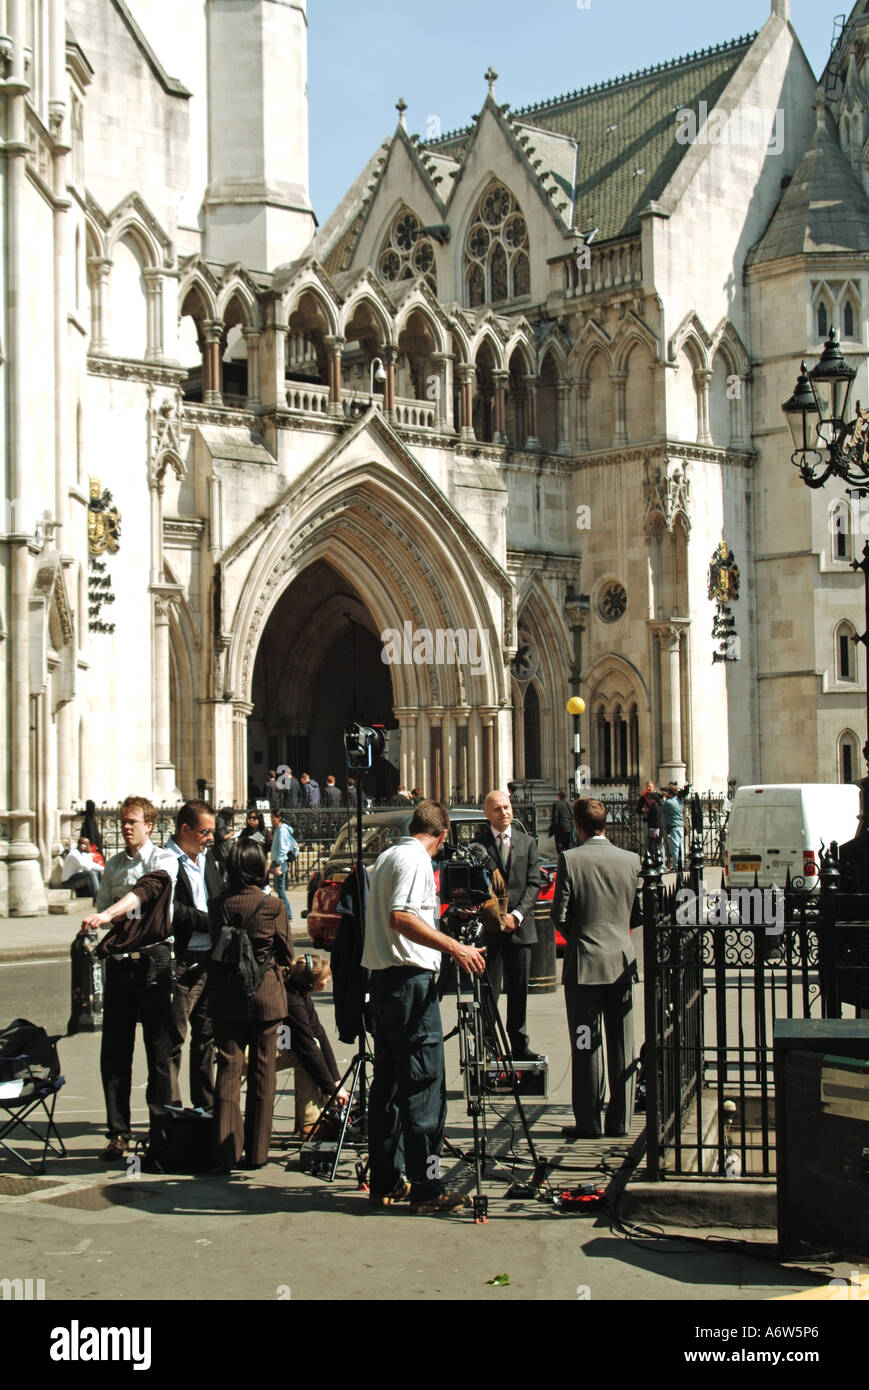 News reporters & journalists with television camera crew at work interviewing & reporting outside the Royal Courts of Justice Strand London England UK Stock Photo